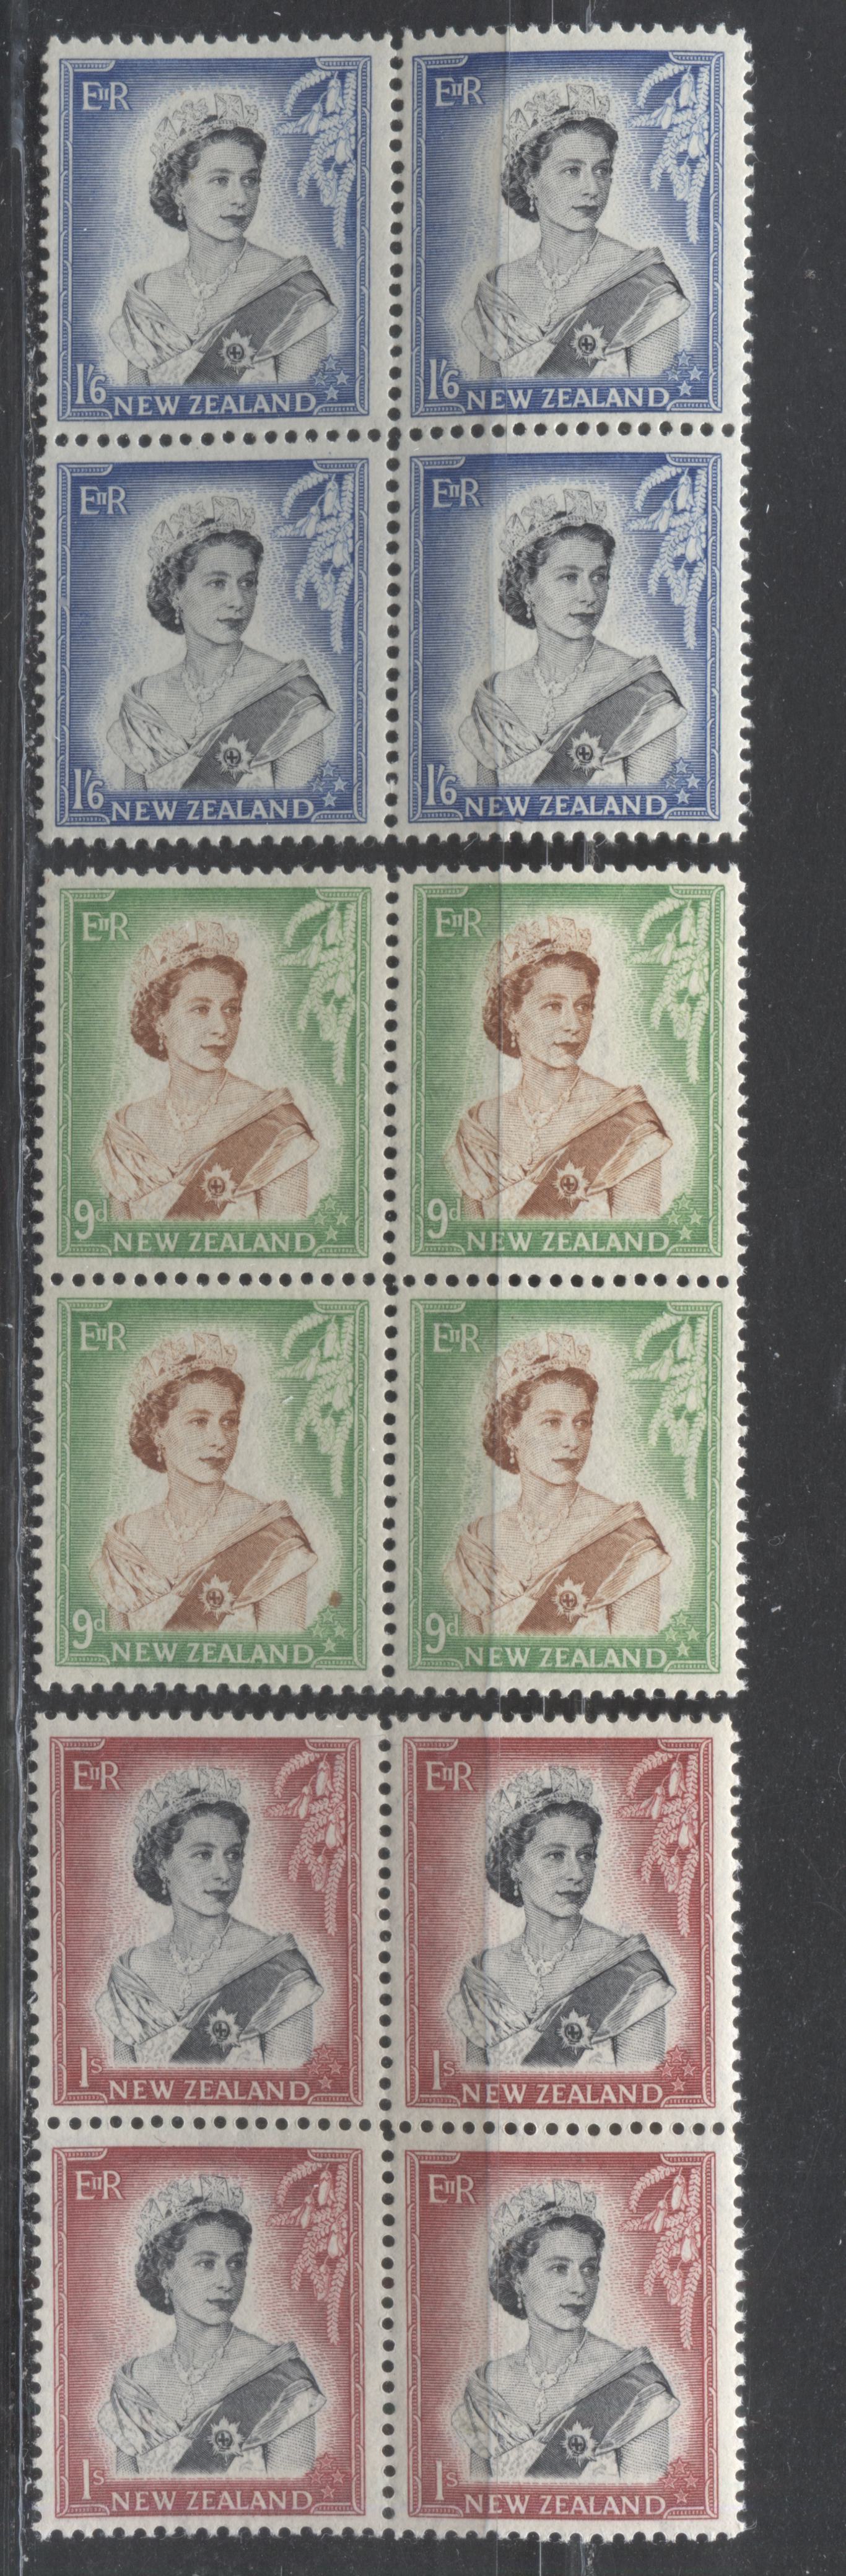 Lot 120 New Zealand SC#296-298 1953-1957 Queen Elizabeth II Definitives, A F/VFNH Range Of Blocks Of 4, 2017 Scott Cat. $11.2 USD, Click on Listing to See ALL Pictures